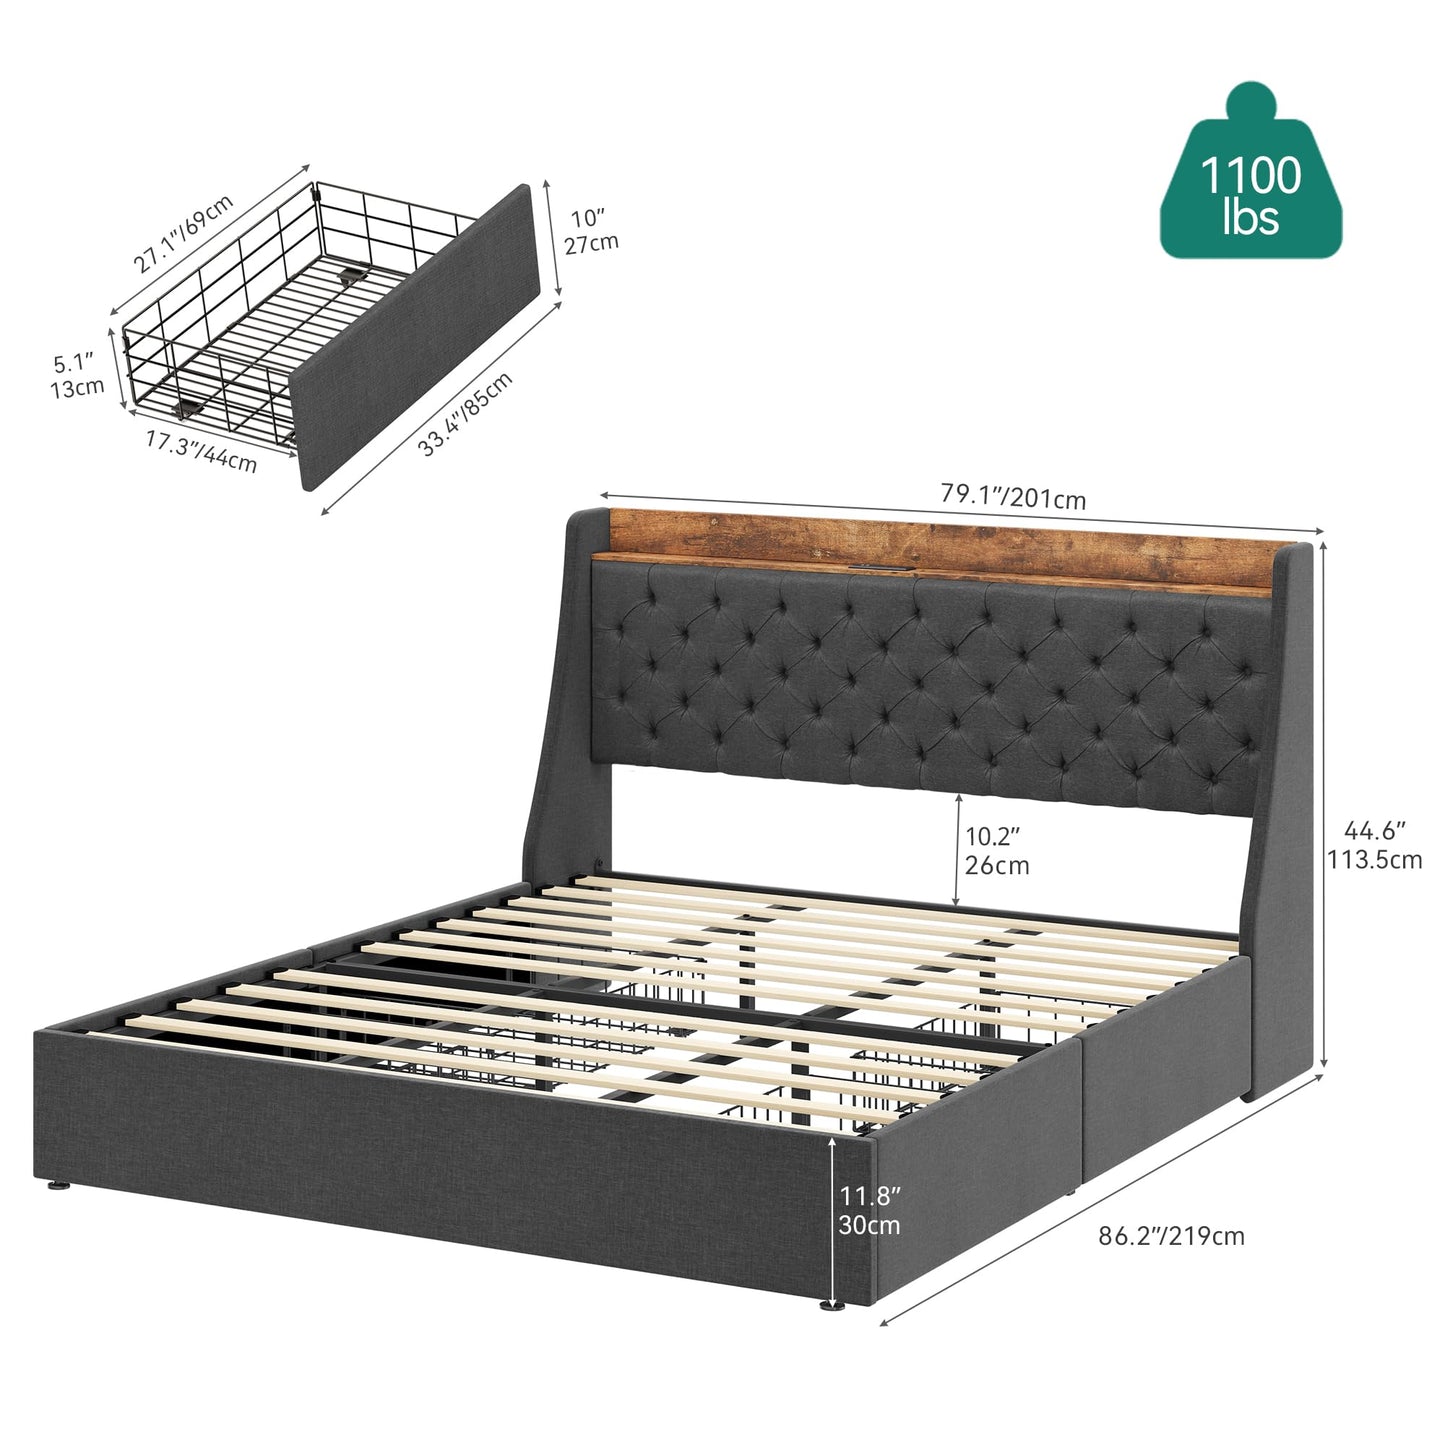 YITAHOME King Size Bed Frame with 4 Storage Drawers, Upholstered Platform Bed Frame with Wingback Storage Headboard, Outlets and USB Ports, Sturdy Wood Slats, No Box Spring Needed - Gray